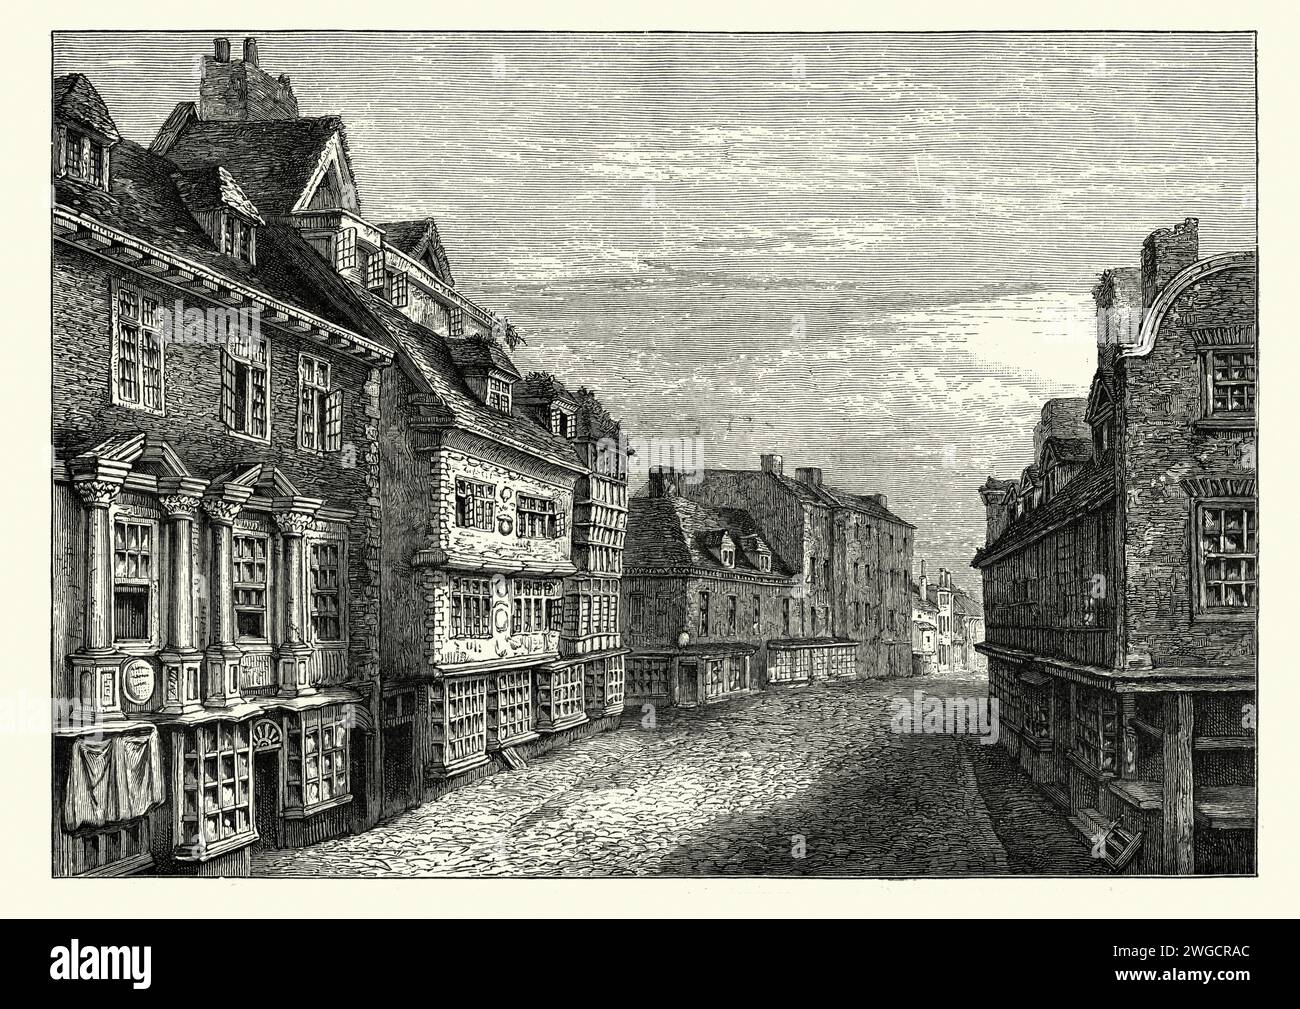 Architecture anglaise, Historic Mardol Street, Shrewsbury, History England in the 18th Century Banque D'Images